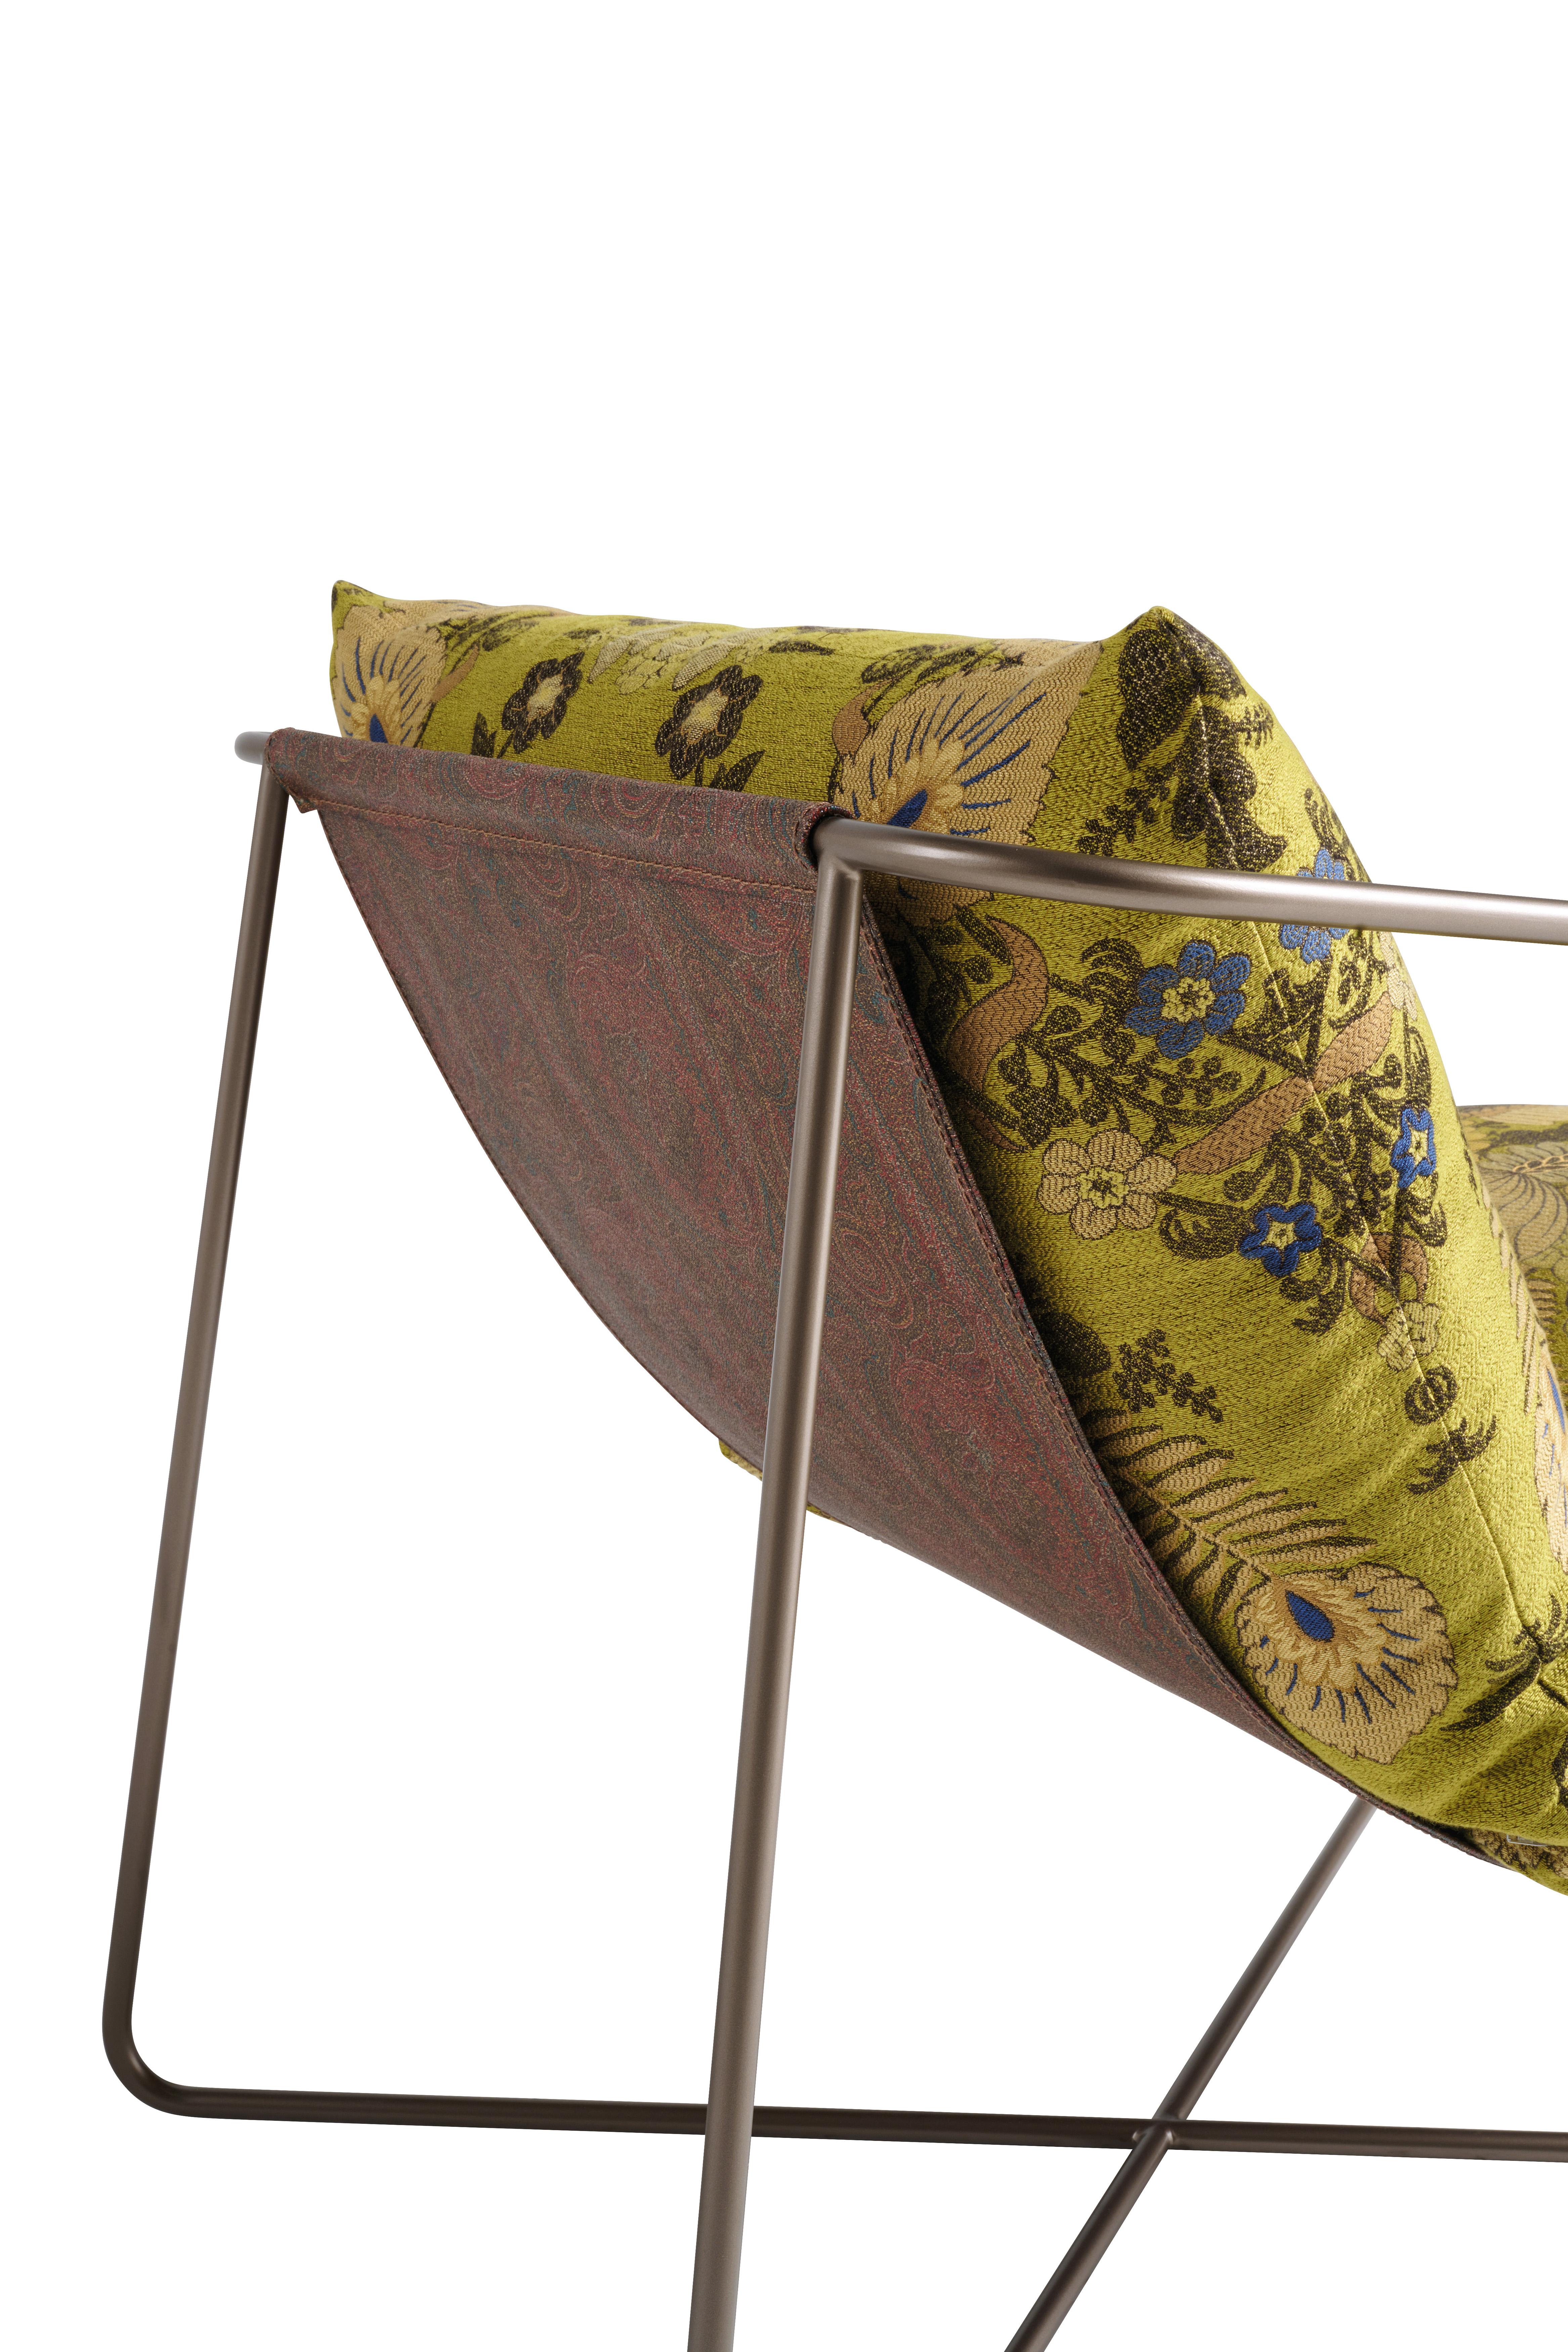 21st Century Levity Armchair in Green Jacquard Fabric by Etro Home Interiors In New Condition For Sale In Cantù, Lombardia